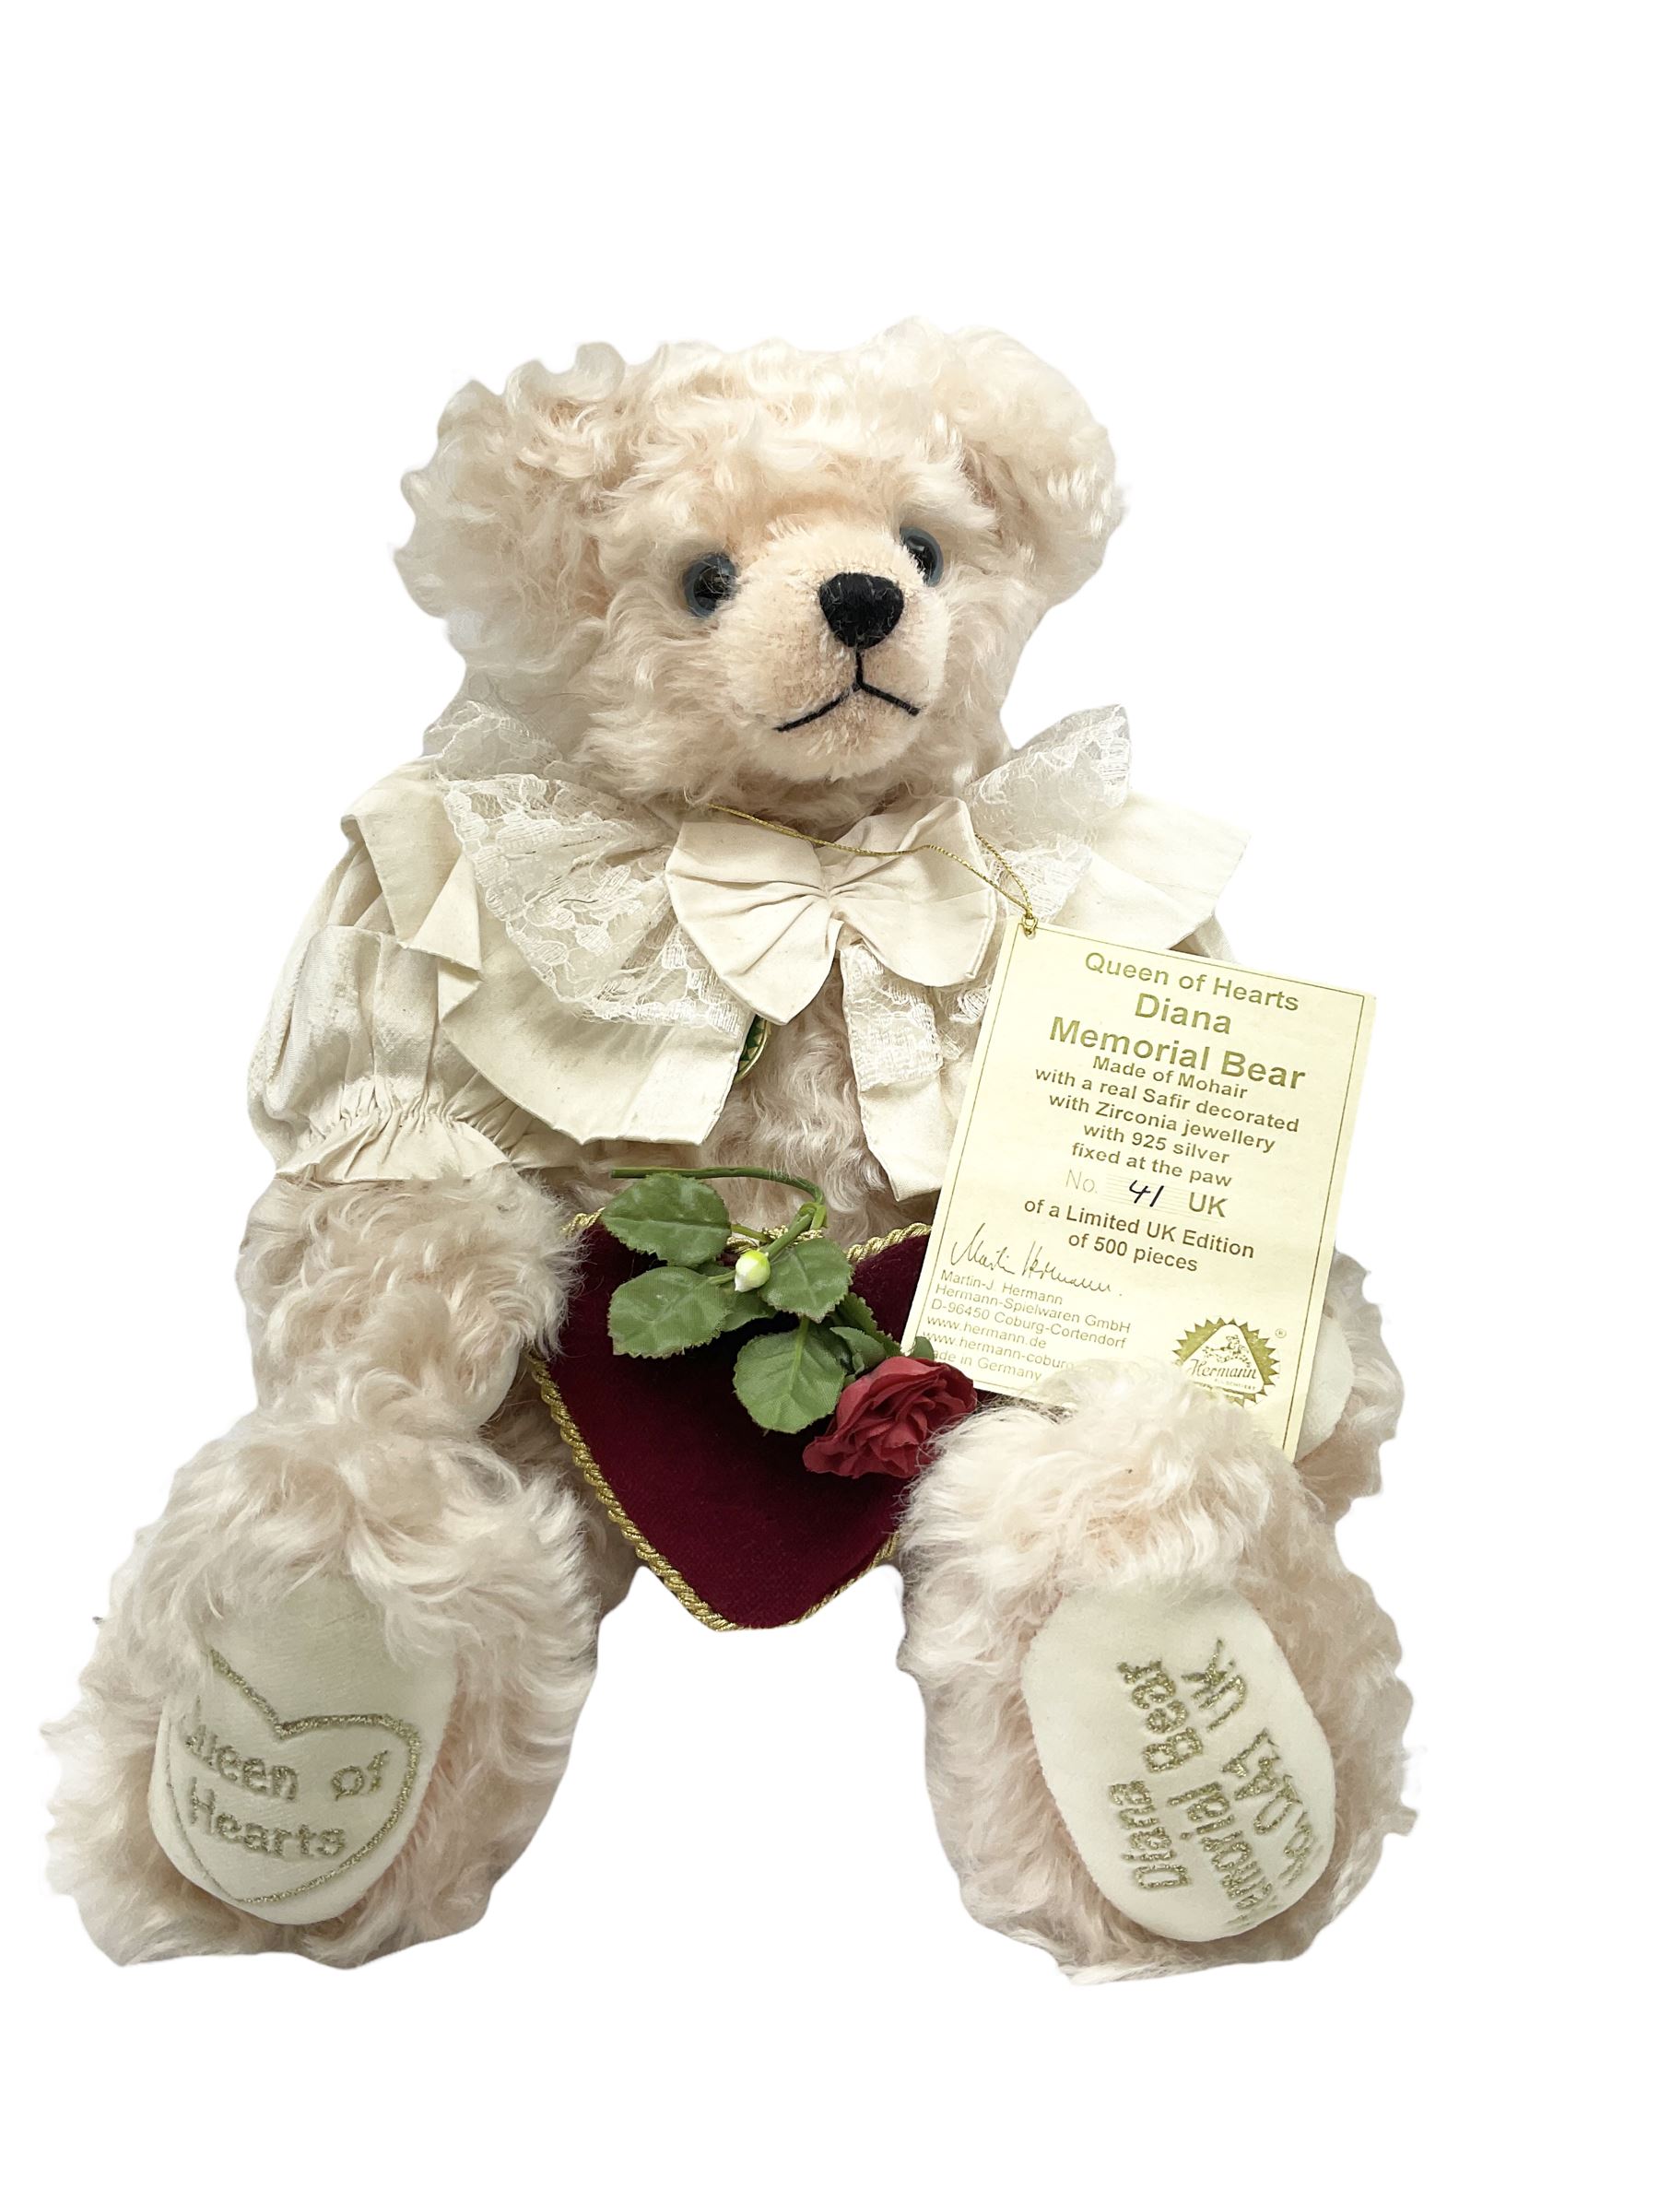 Five modern collector's teddy bears - Steiff 2001 bear No.660177 with tags; Hermann limited edition - Image 6 of 8